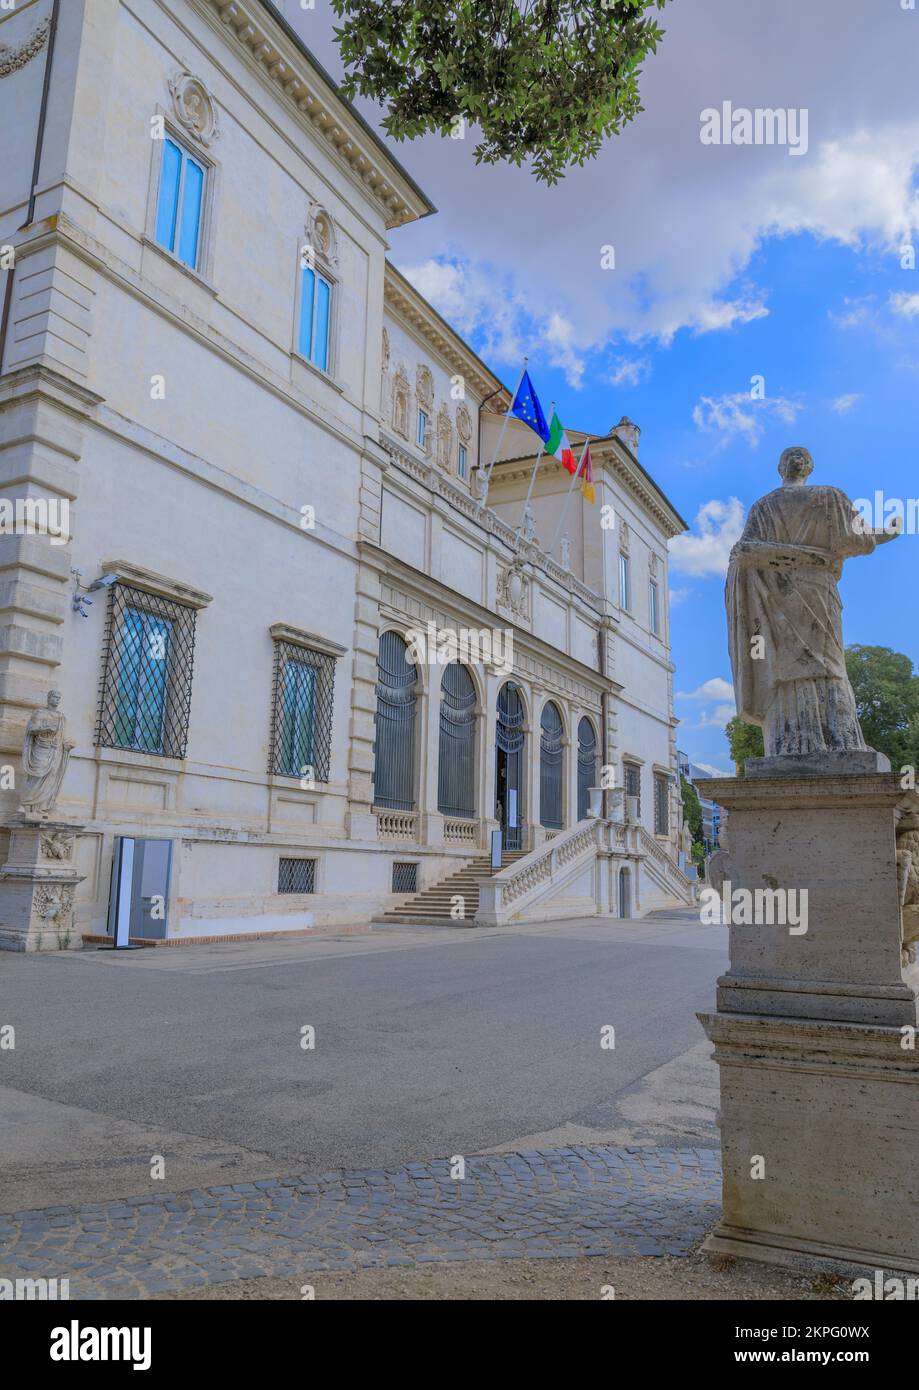 View of the facade of the Galleria Borghese inside the public park of Villa Borghese in Rome, Italy. Stock Photo